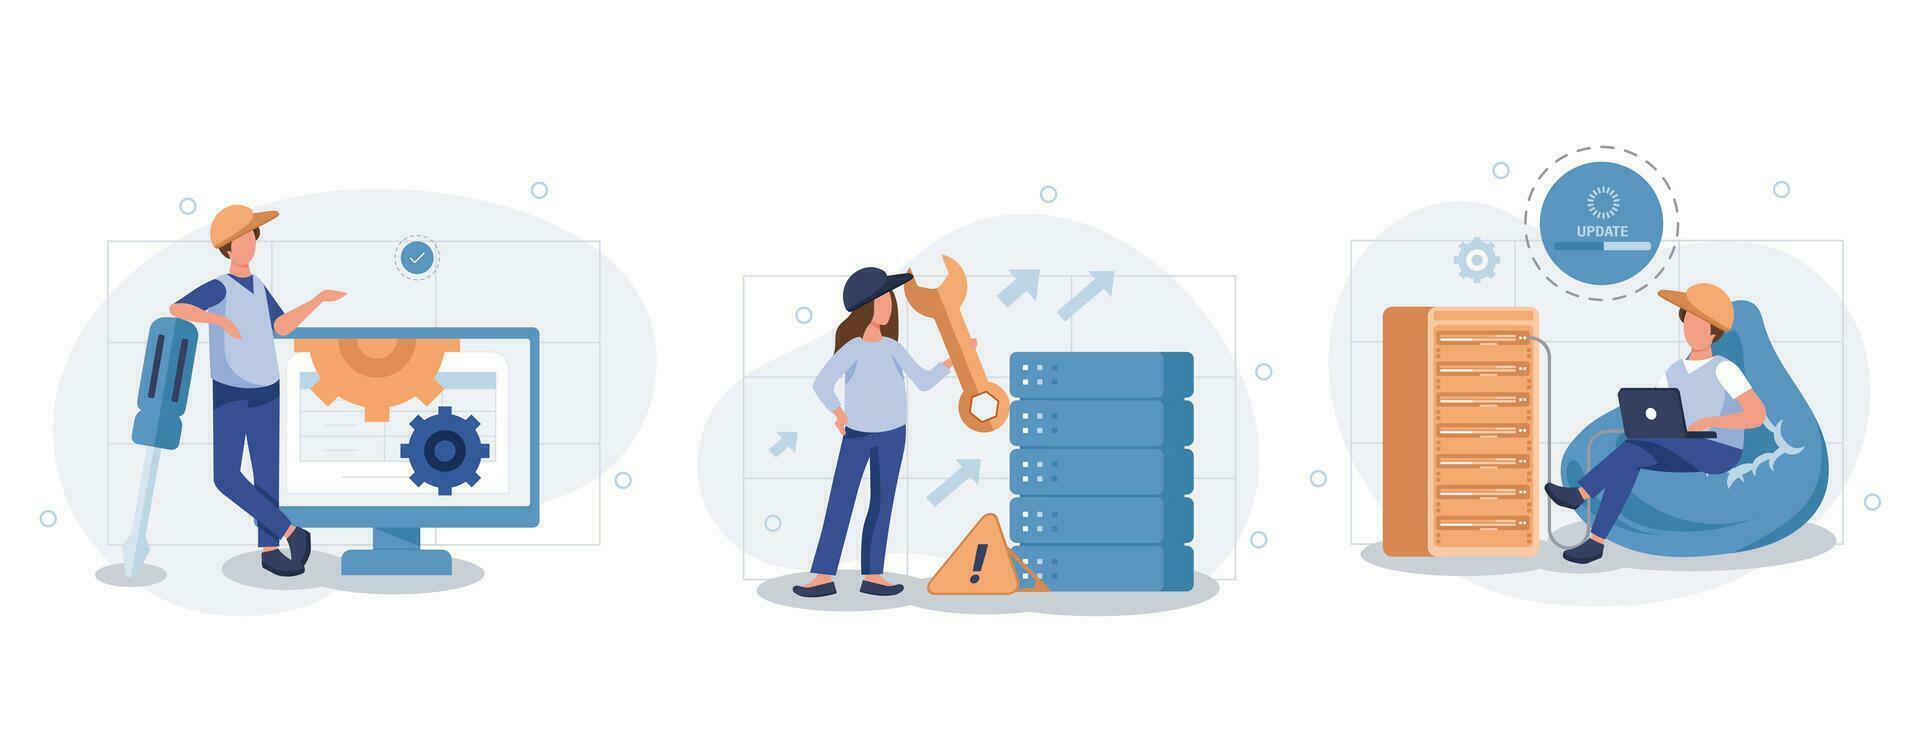 Server maintenance web concept with people scenes set in flat style. Bundle of technical work, working at server rack hardware room, engineers team repairs. Vector illustration with character design